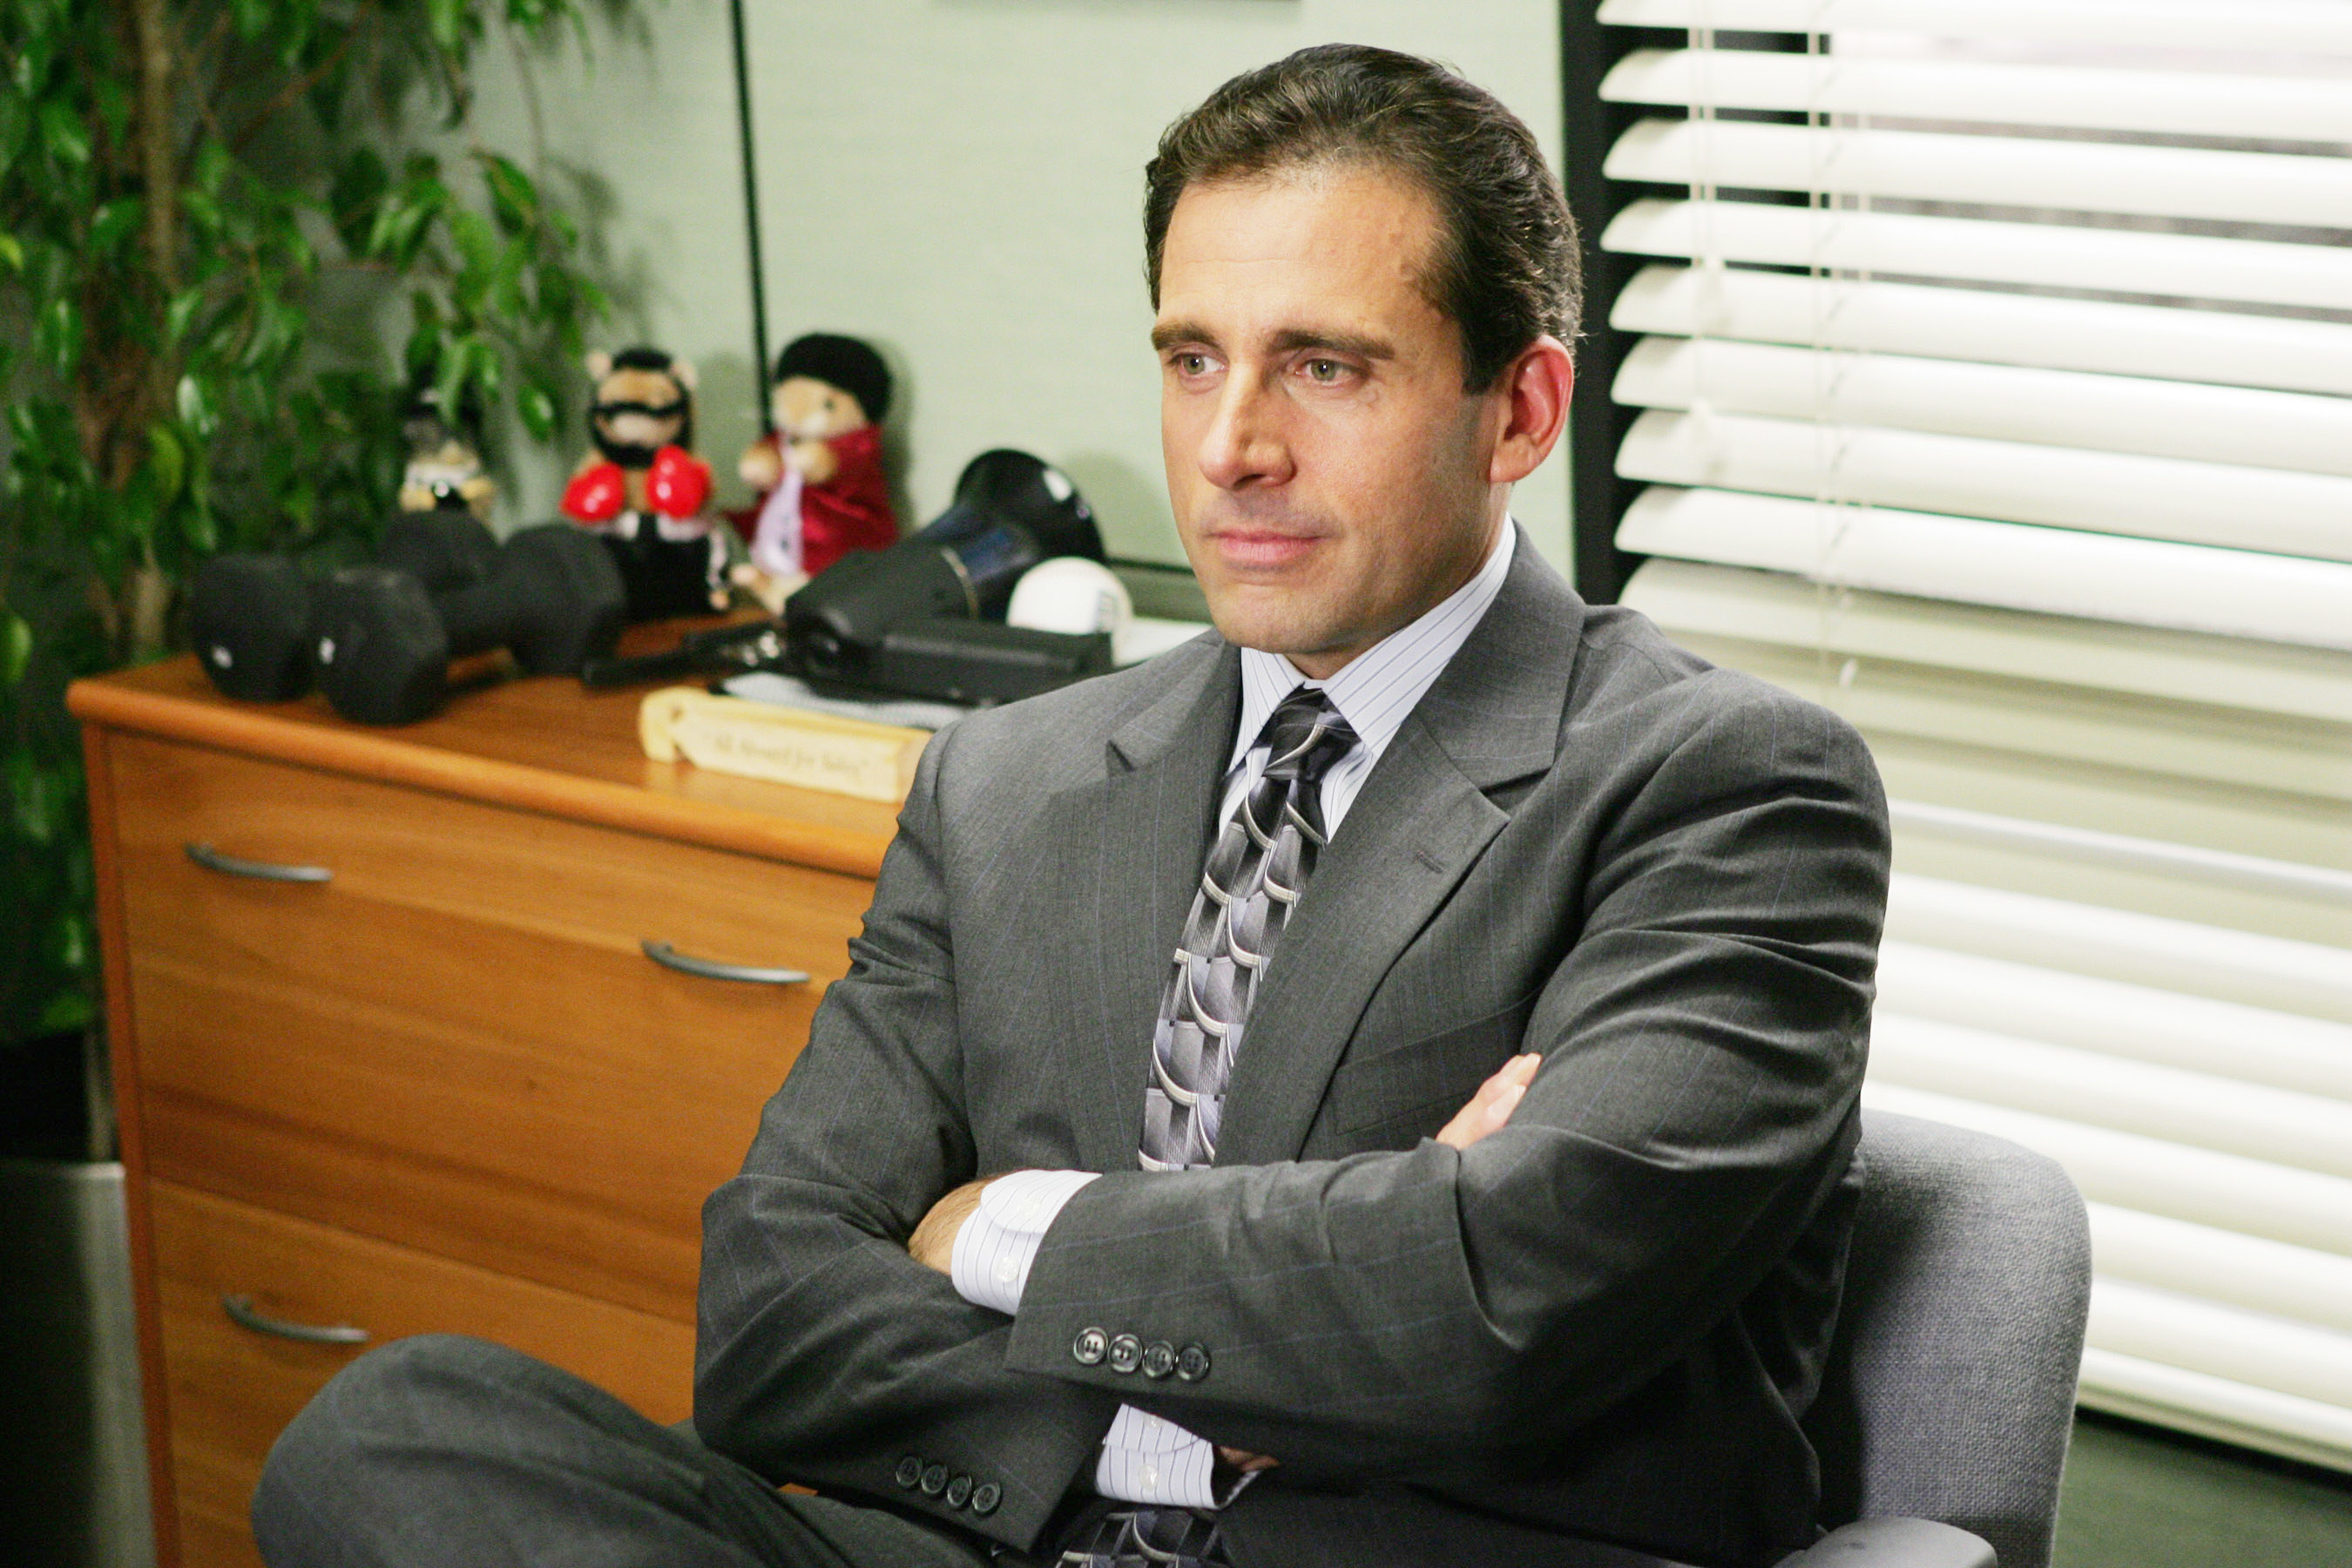 Steve as Michael wearing a suit and sitting with his arms folded